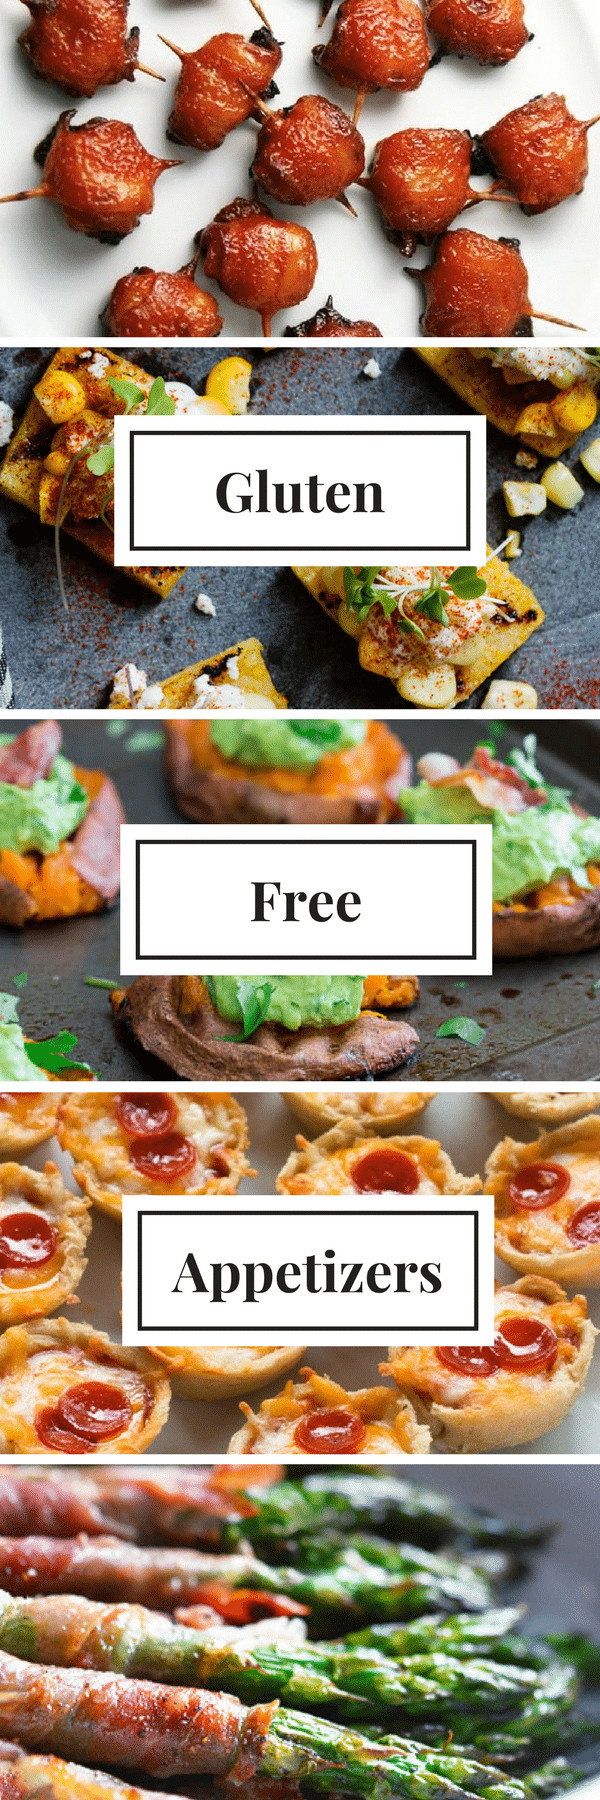 Dairy Free Appetizers
 Gluten Free Appetizers that are Perfect for Your Party